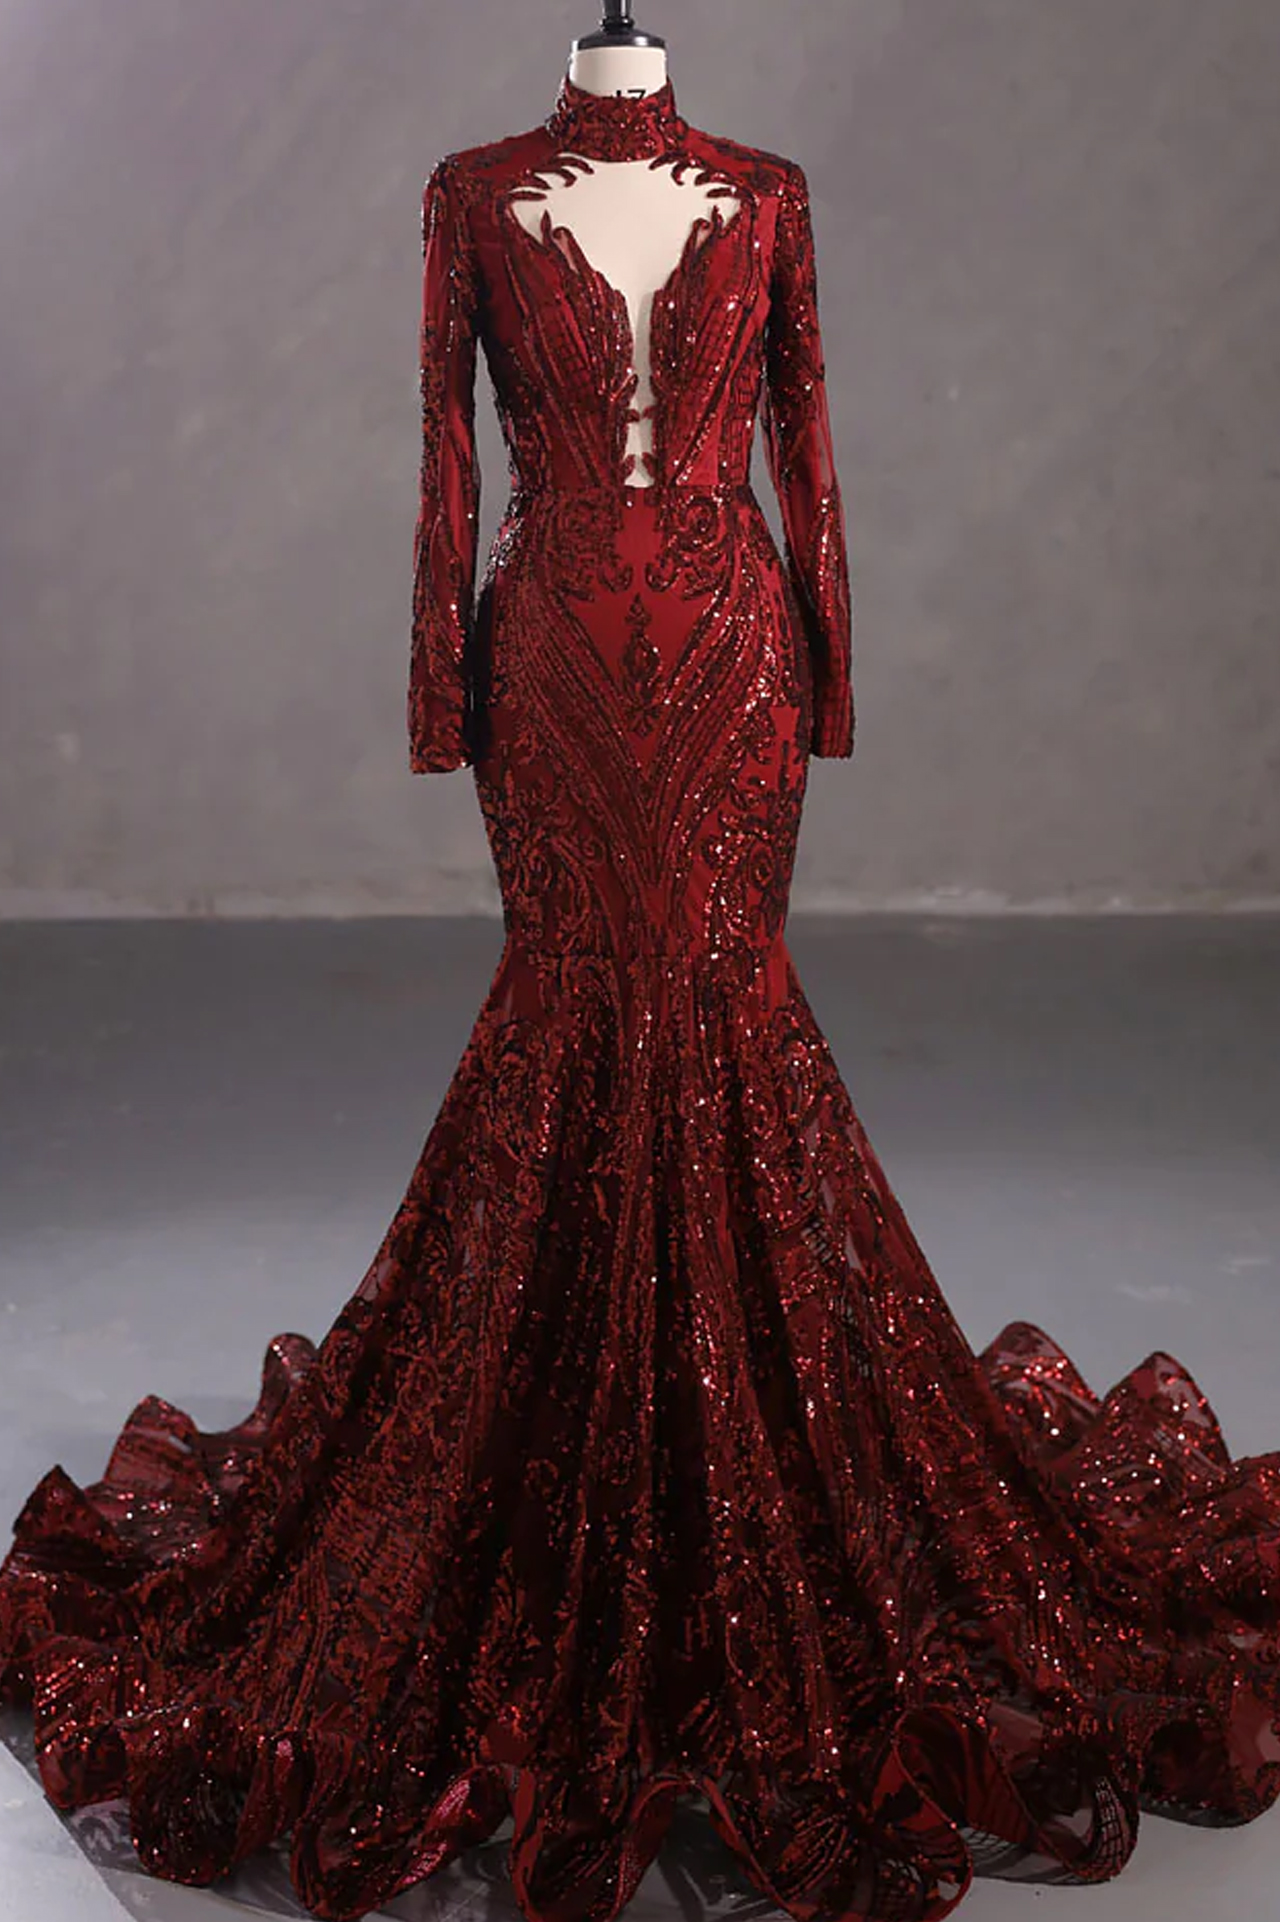 Long Burgundy Sequins Lace Formal Evening Dress With Halter Neck, Mermaid Party Prom Dress